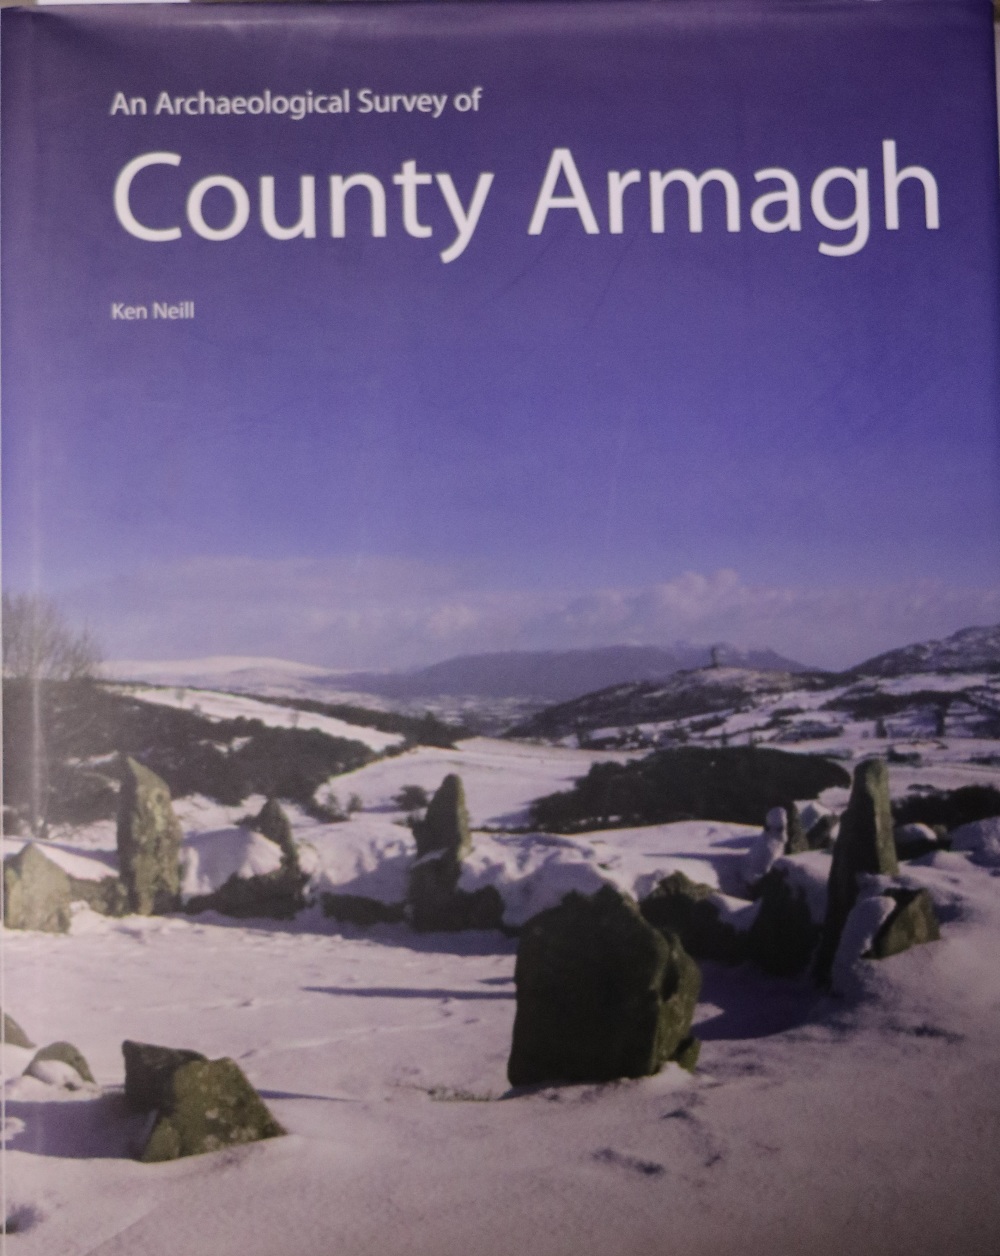 Neill (Ken) An Archaeological Survey of County Armagh, thick lg. 4to Belfast 2009. Illus. - Image 2 of 2